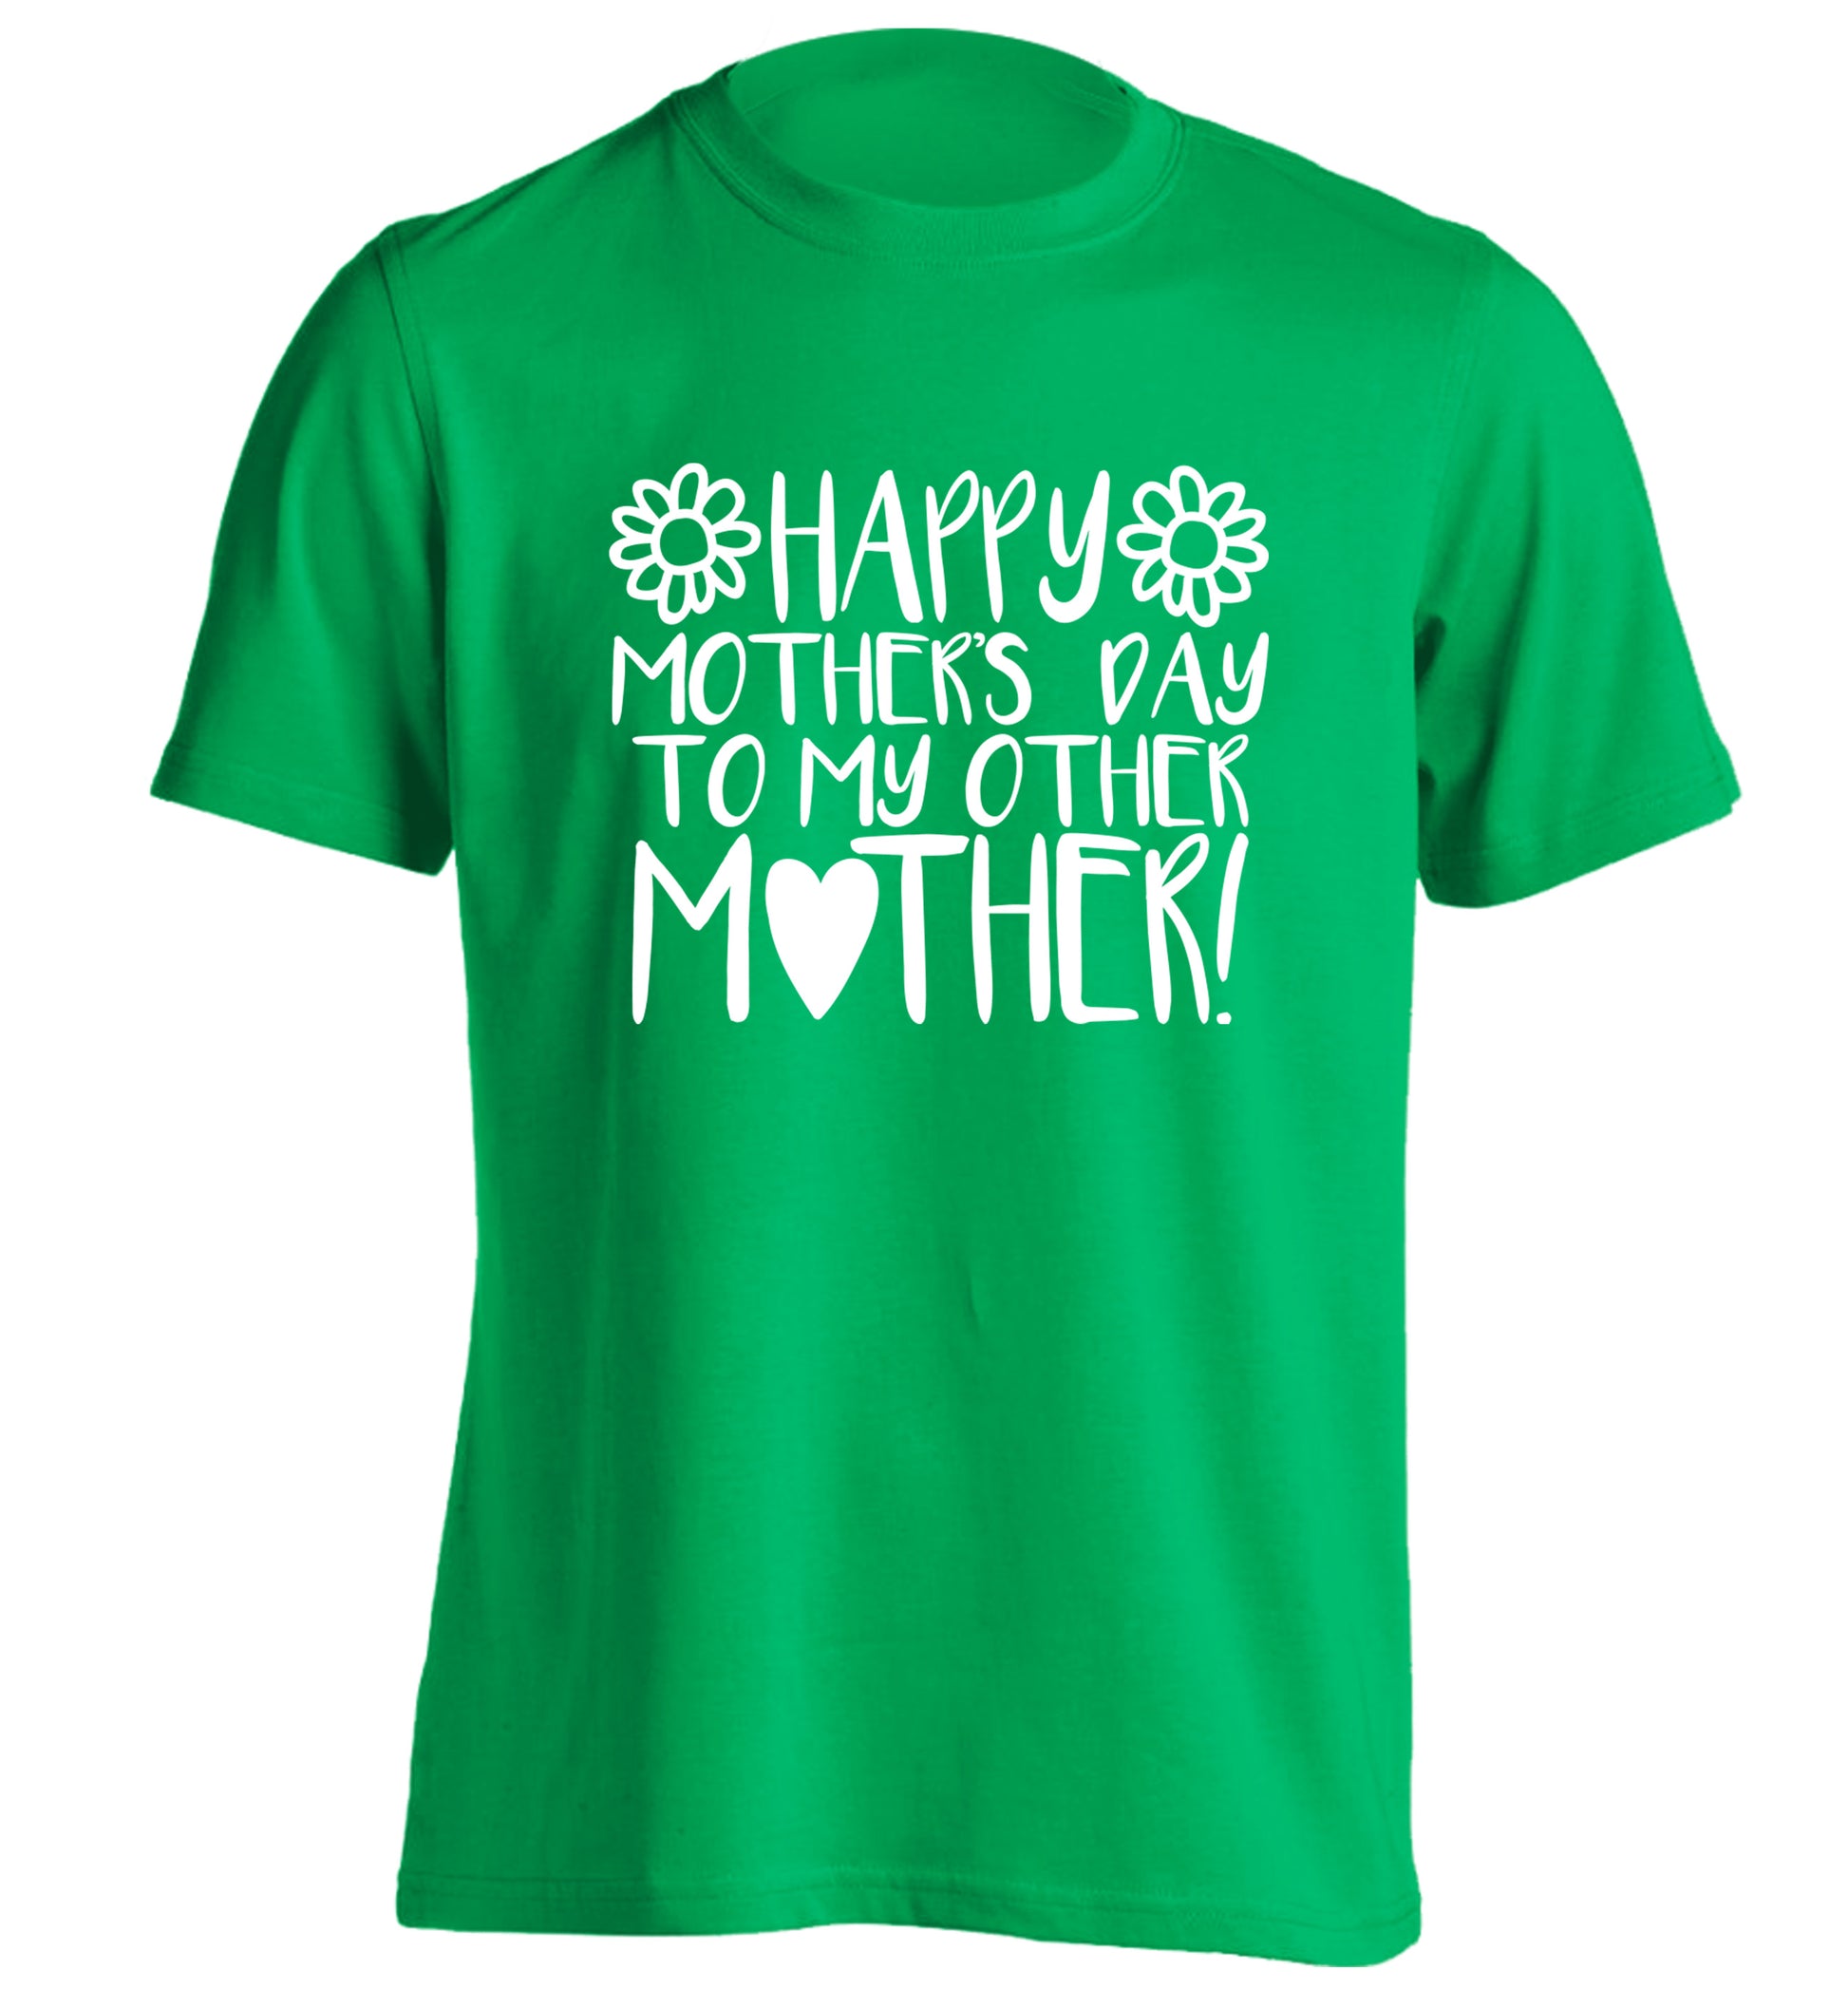 Happy mother's day to my other mother adults unisex green Tshirt 2XL